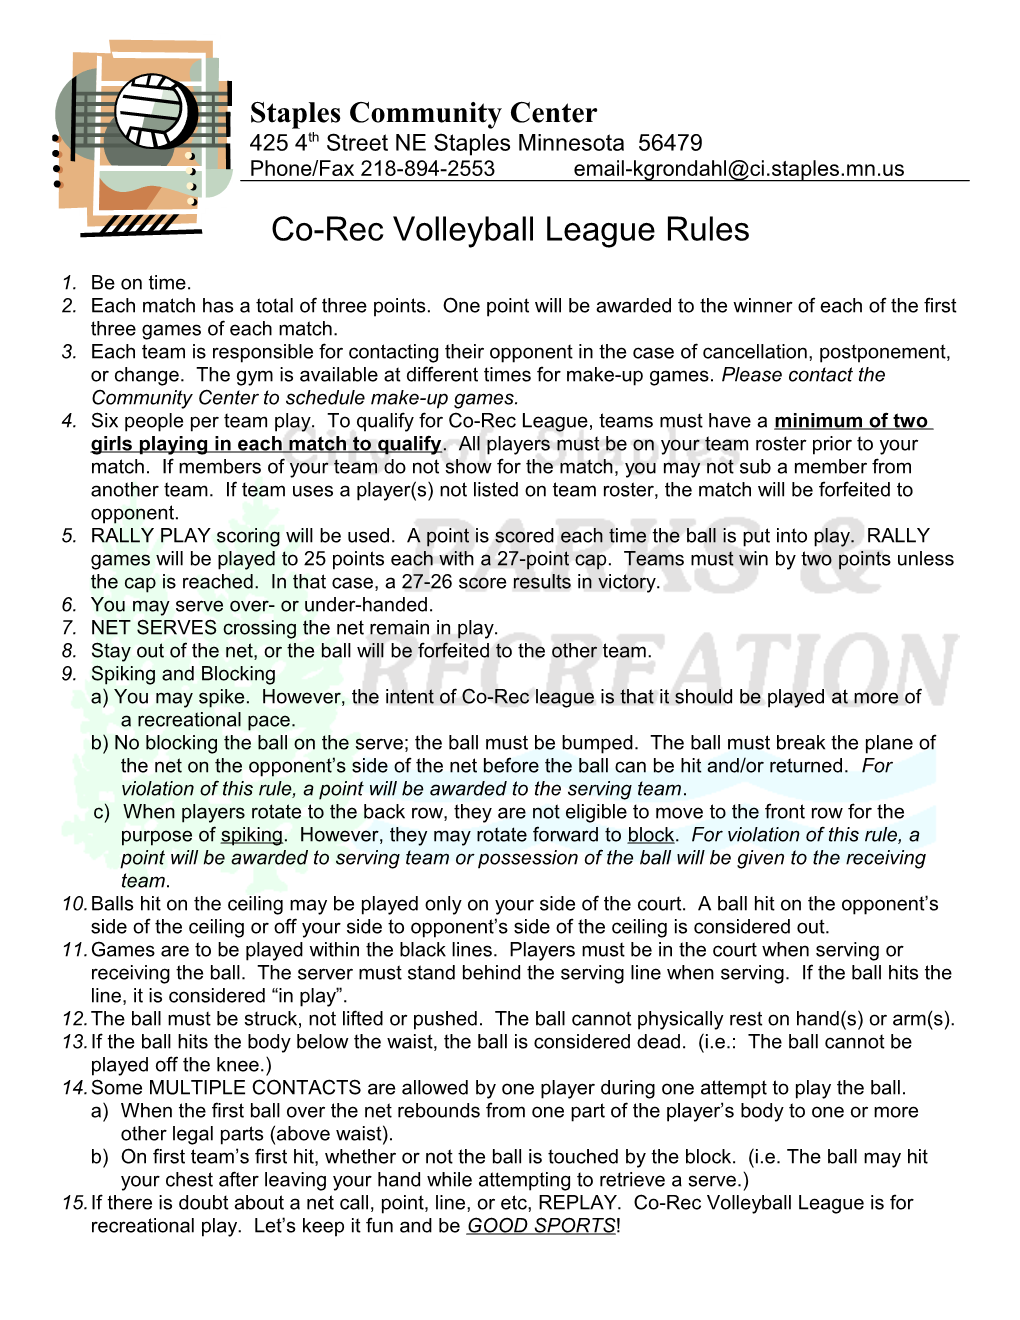 Co-Rec Volleyball League Rules